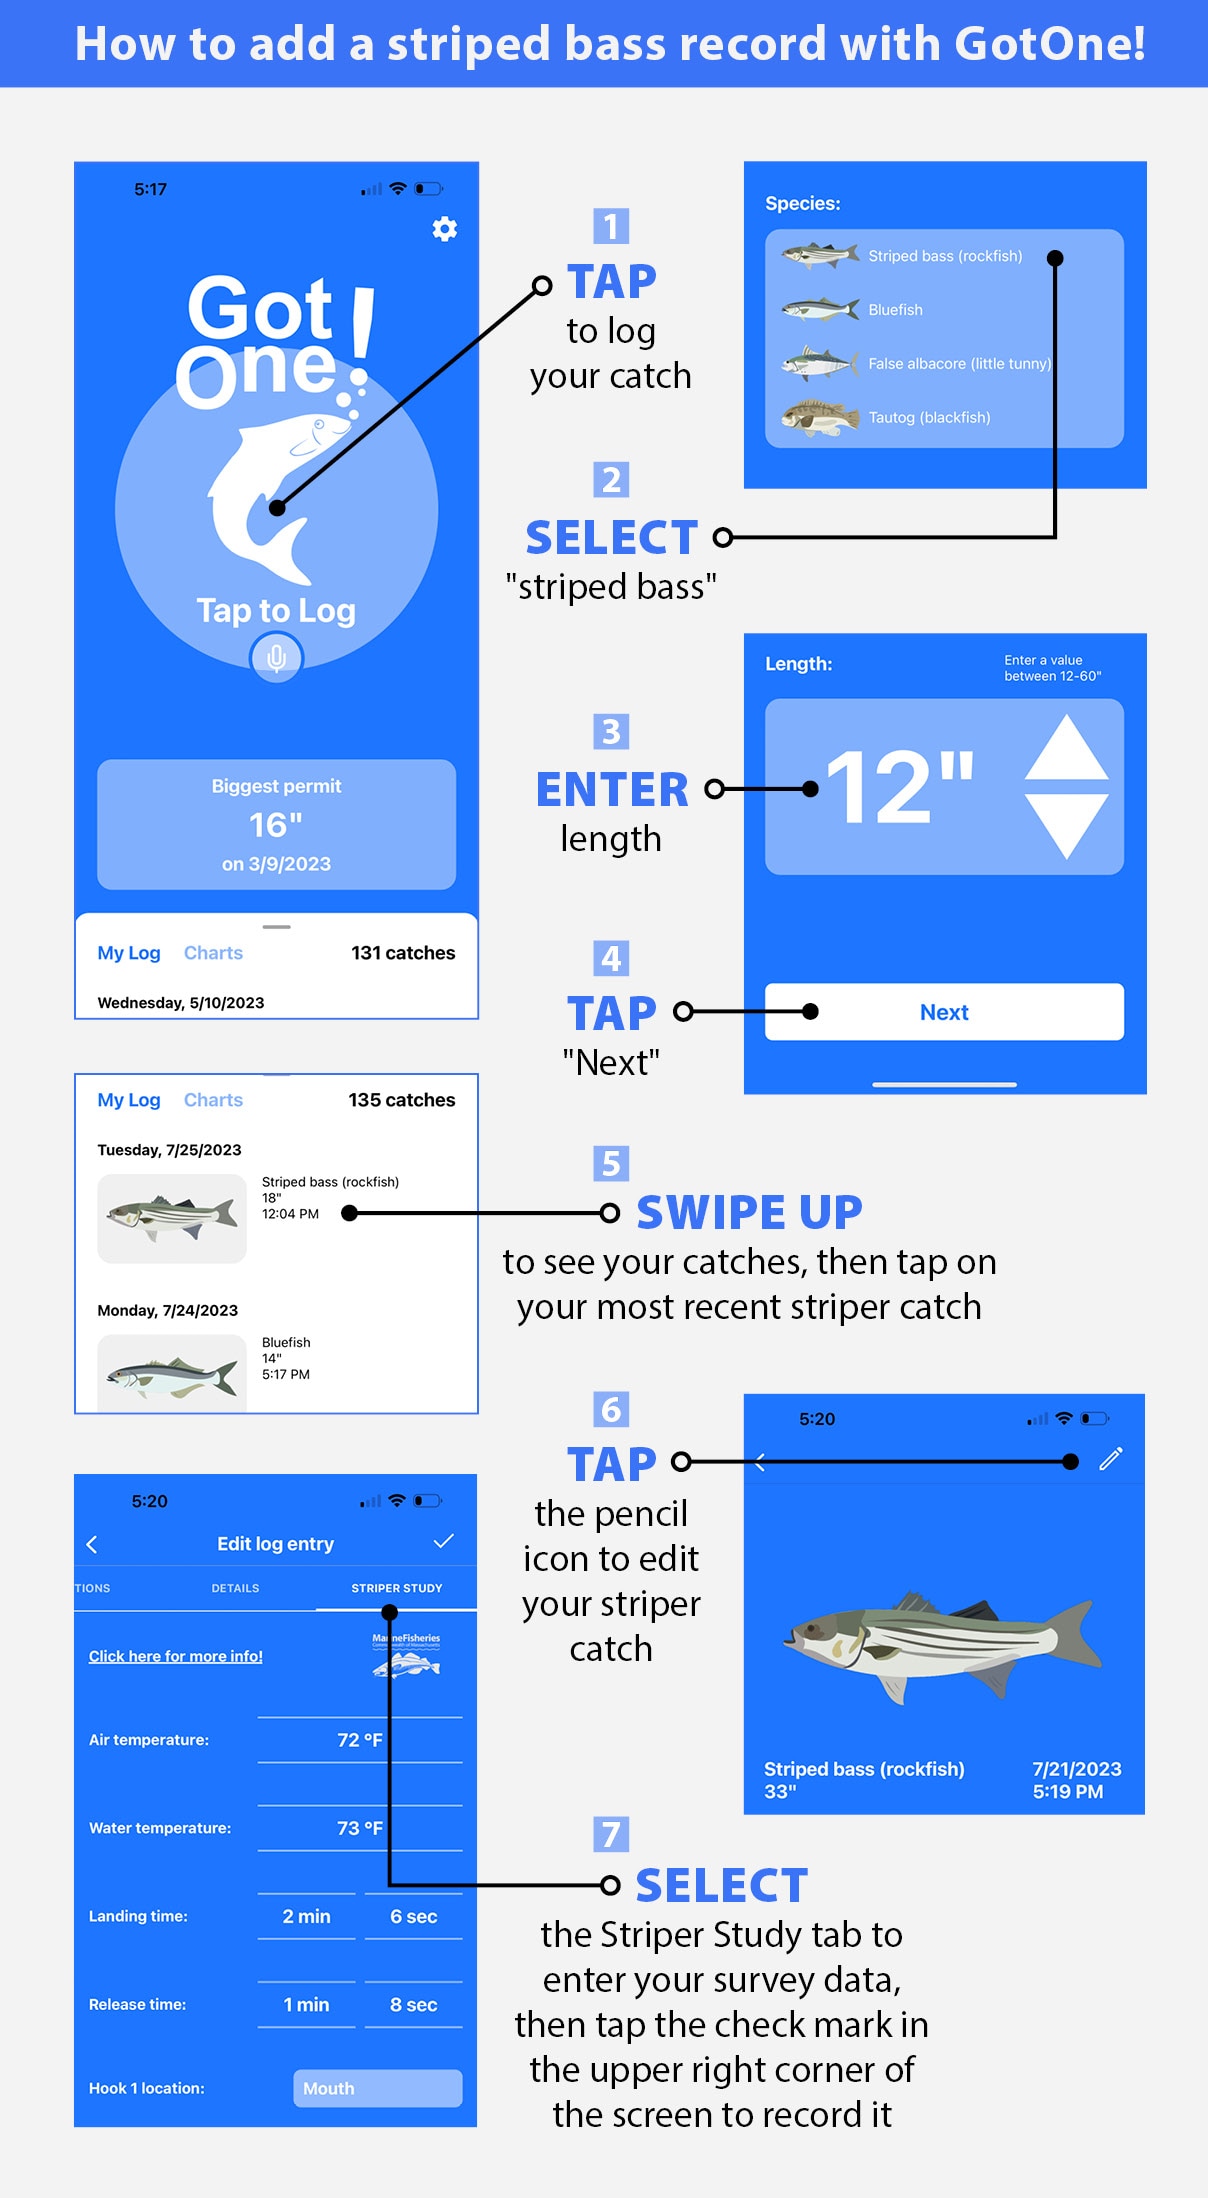 Infographic showing the steps to add a striped bass record with the GotOne fishing app.